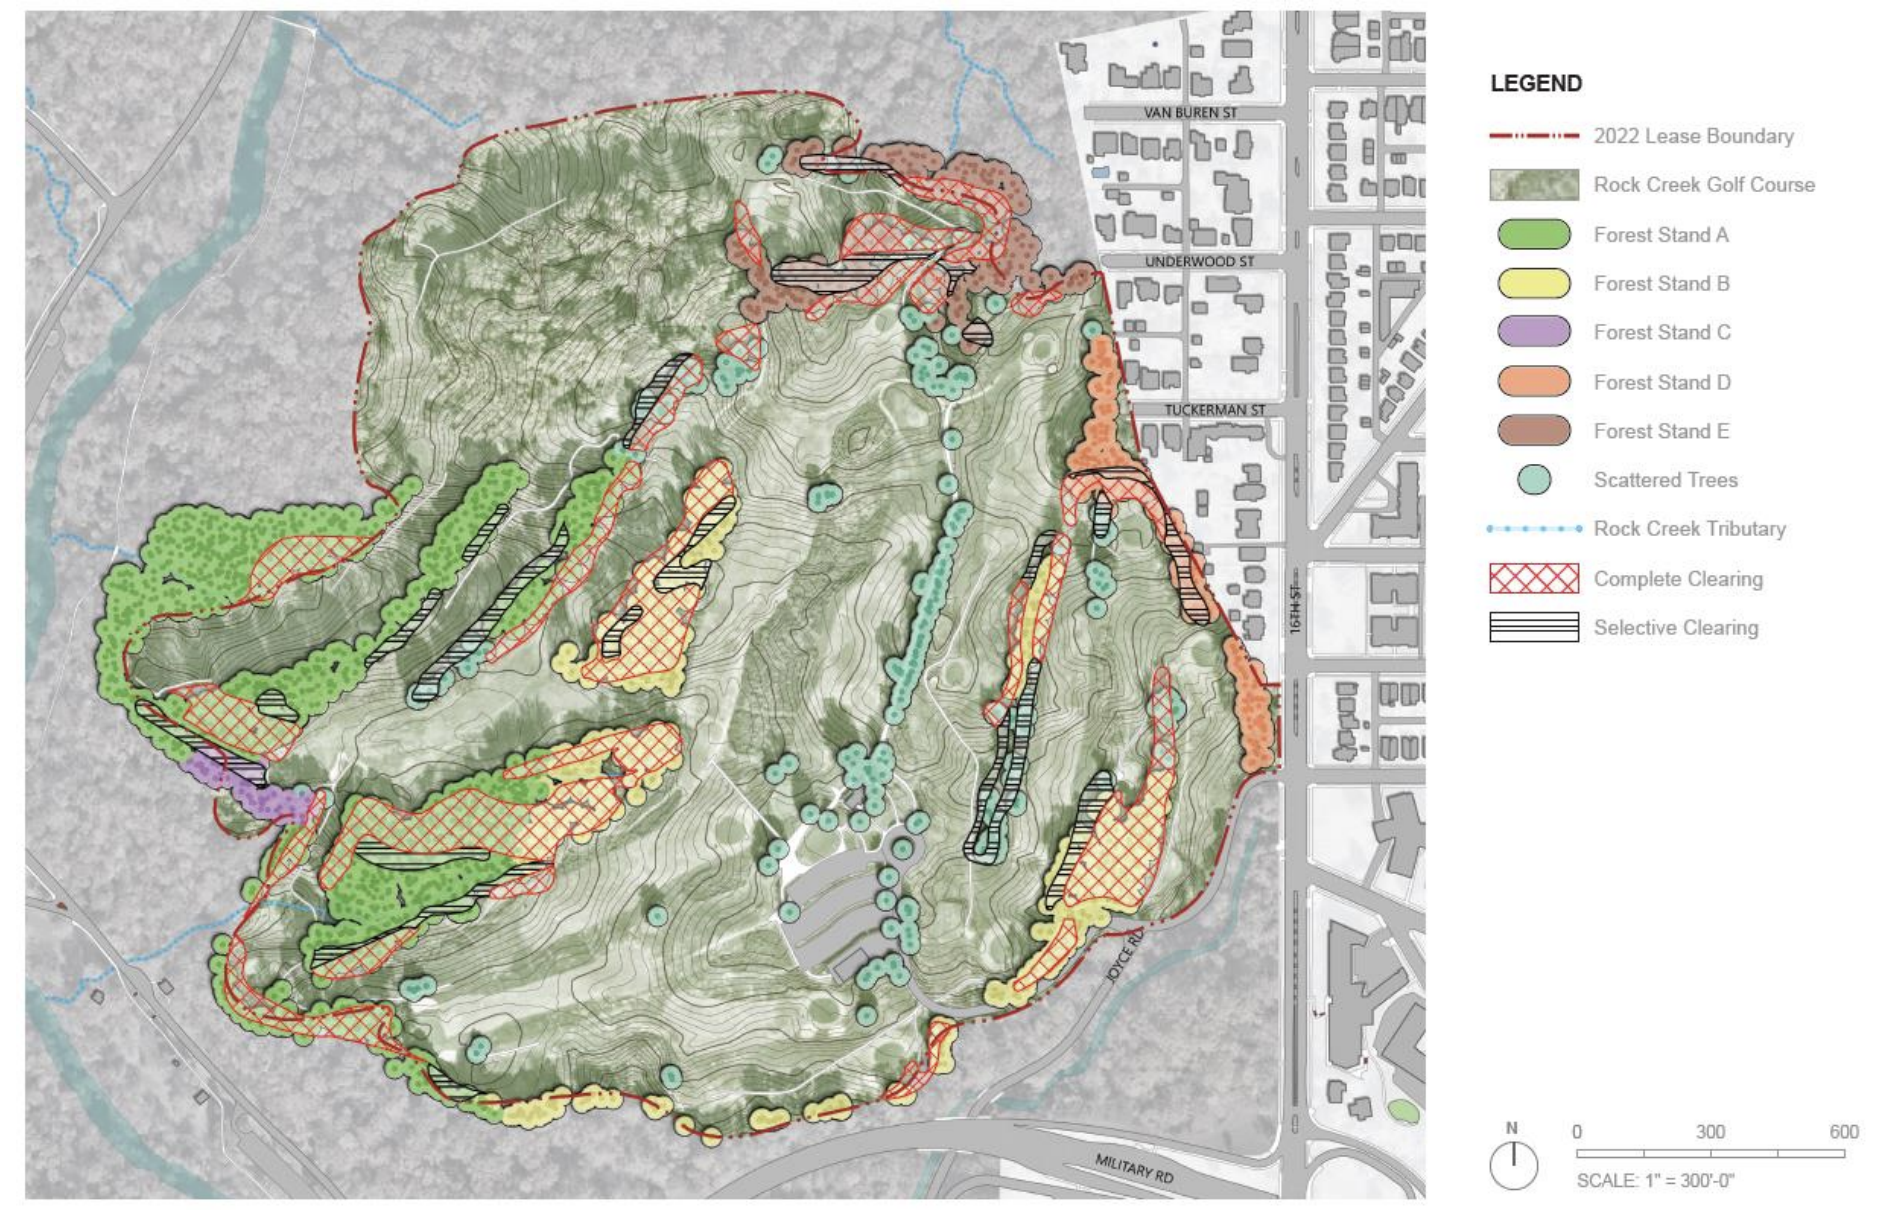 A map of the golf courses with shaded areas showing proposed tree removals